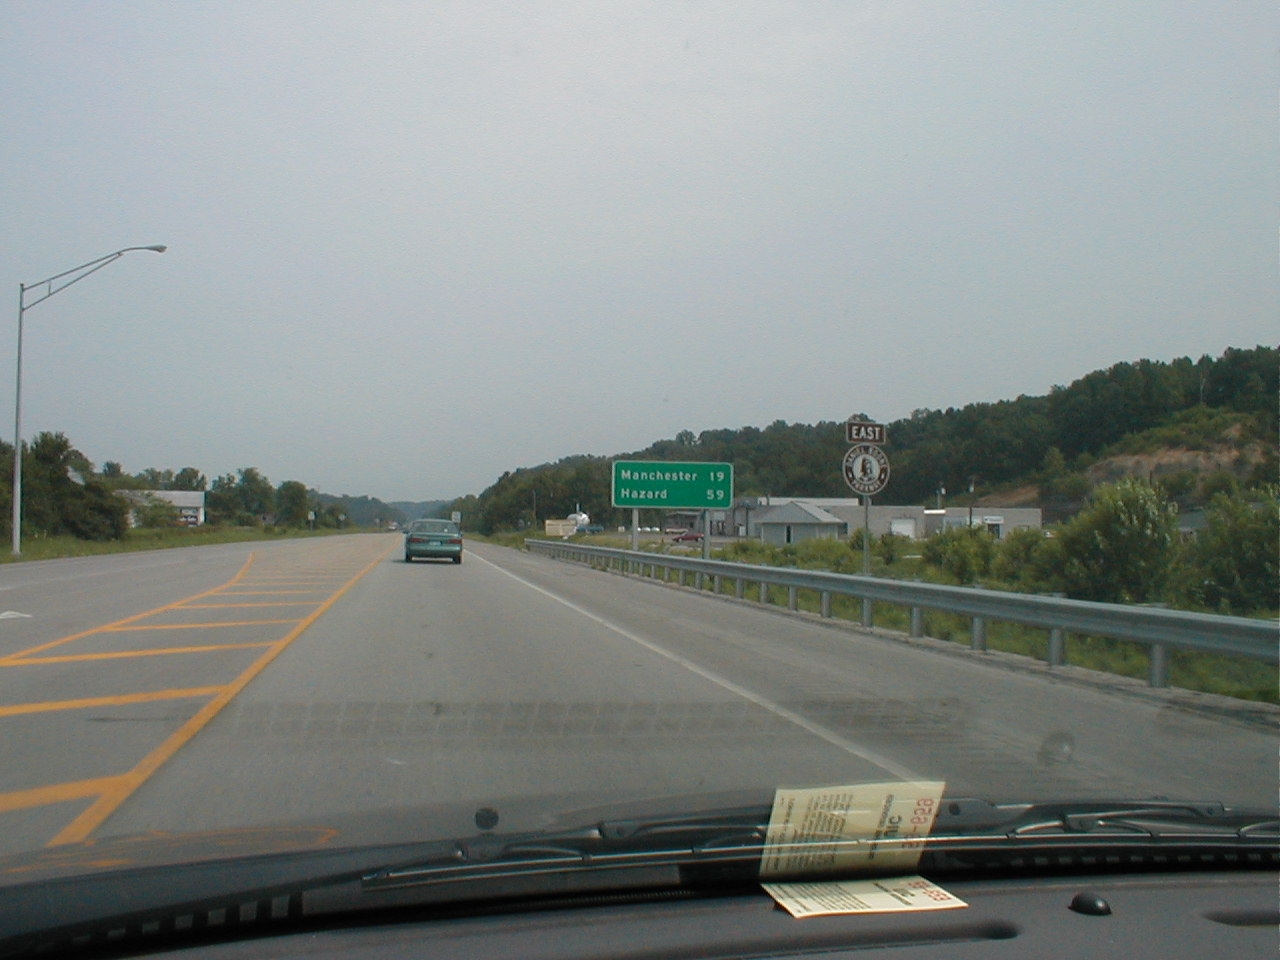 Entering the former toll section of the parkway. A Daniel Boone Parkway sign is visible.